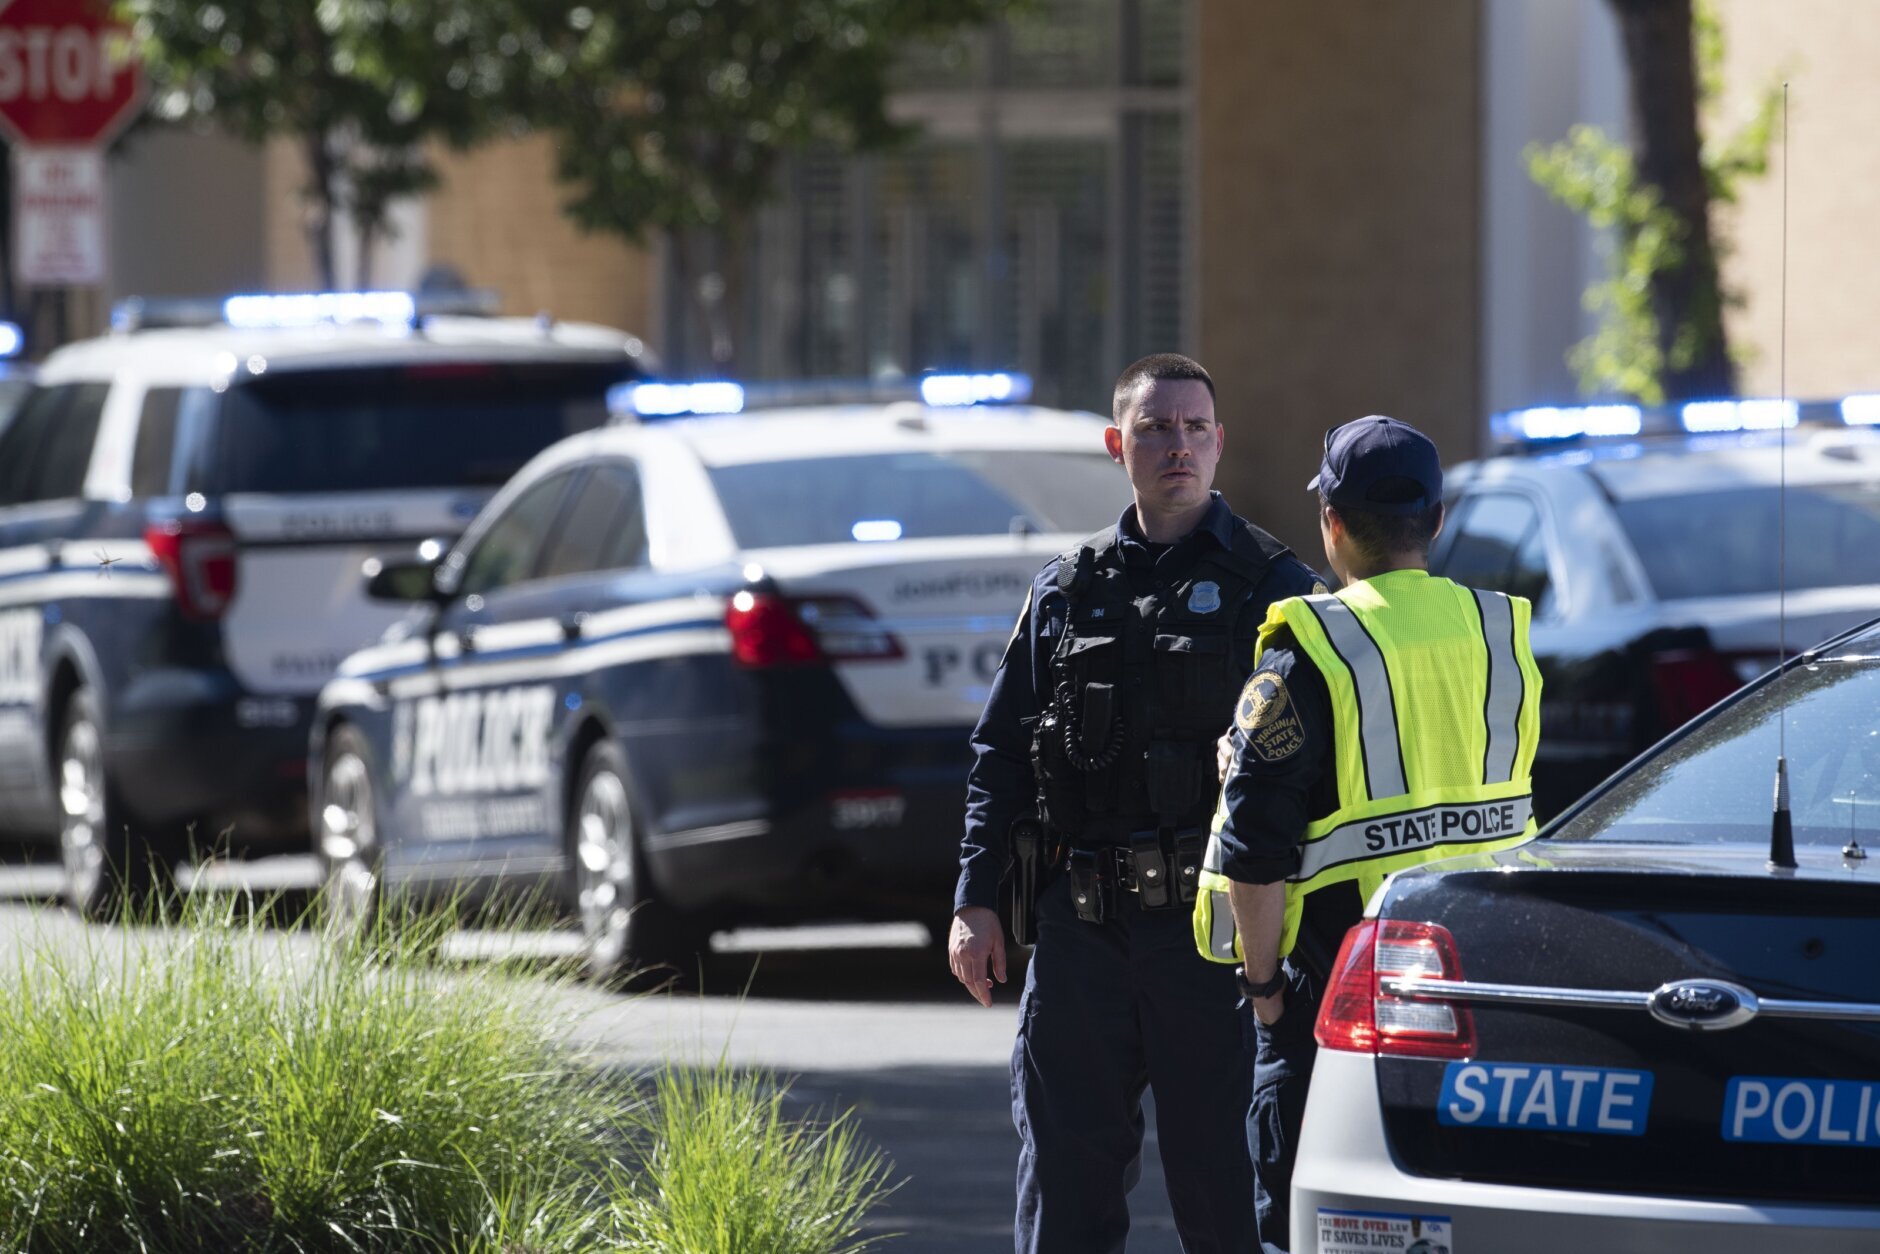 Virginia State Police stand watch outside the Bloomingdale's store, following a shooting inside the Tysons Corner Center mall, in Tysons Corner, Va., Saturday, June 18, 2022. (AP Photo/Cliff Owen)